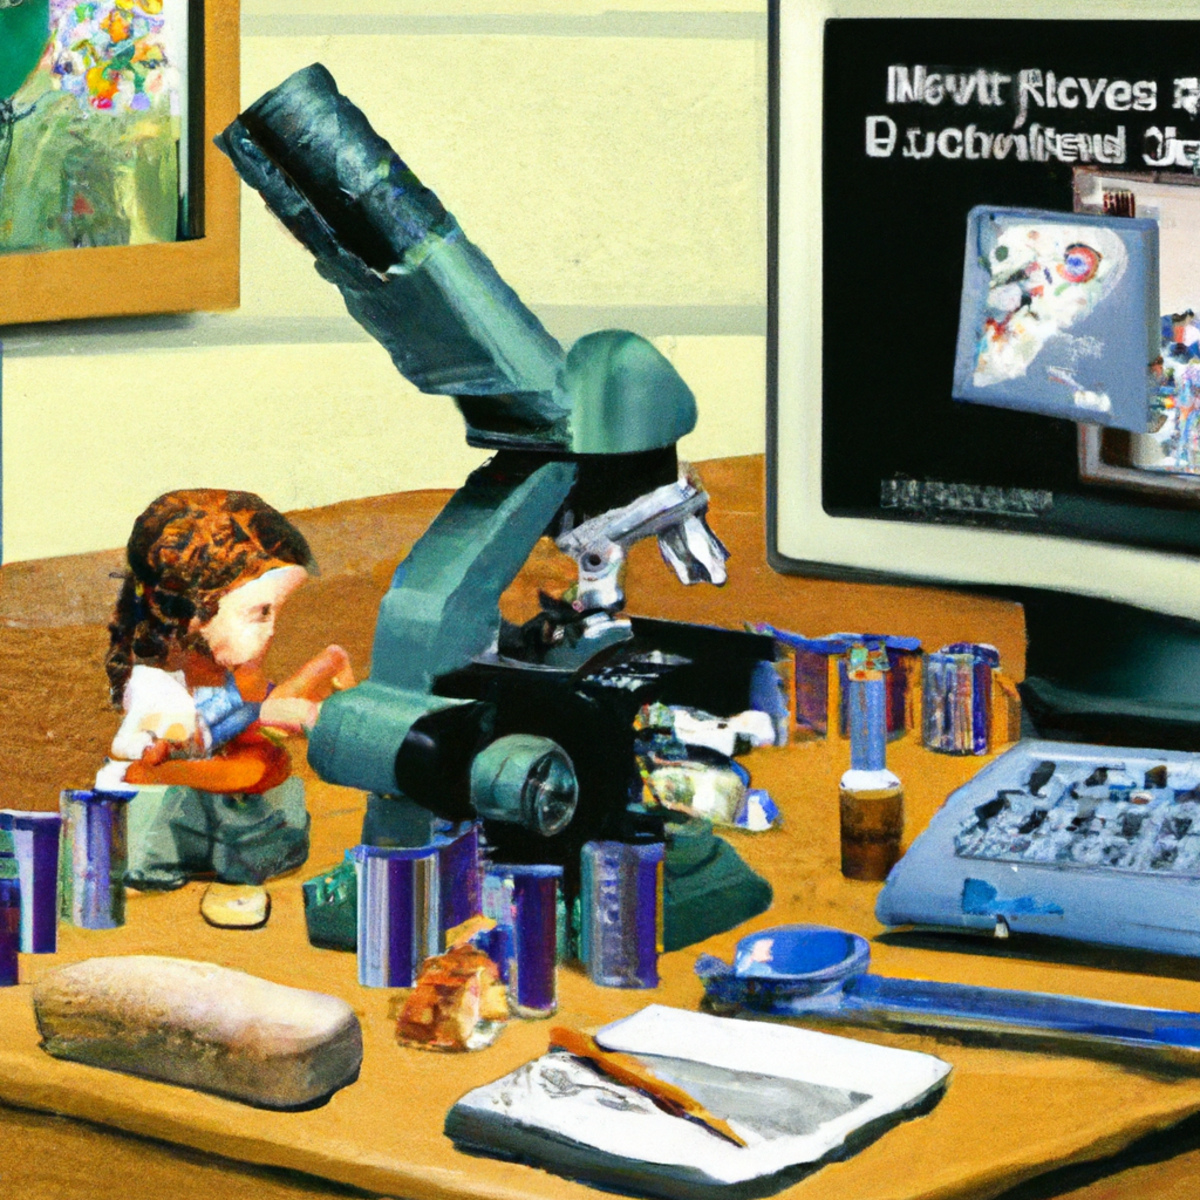 Medical lab with diagnostic tools, microscope, test tubes, petri dishes, computer screen displaying graphs, emphasizing early detection of Bartter Syndrome.